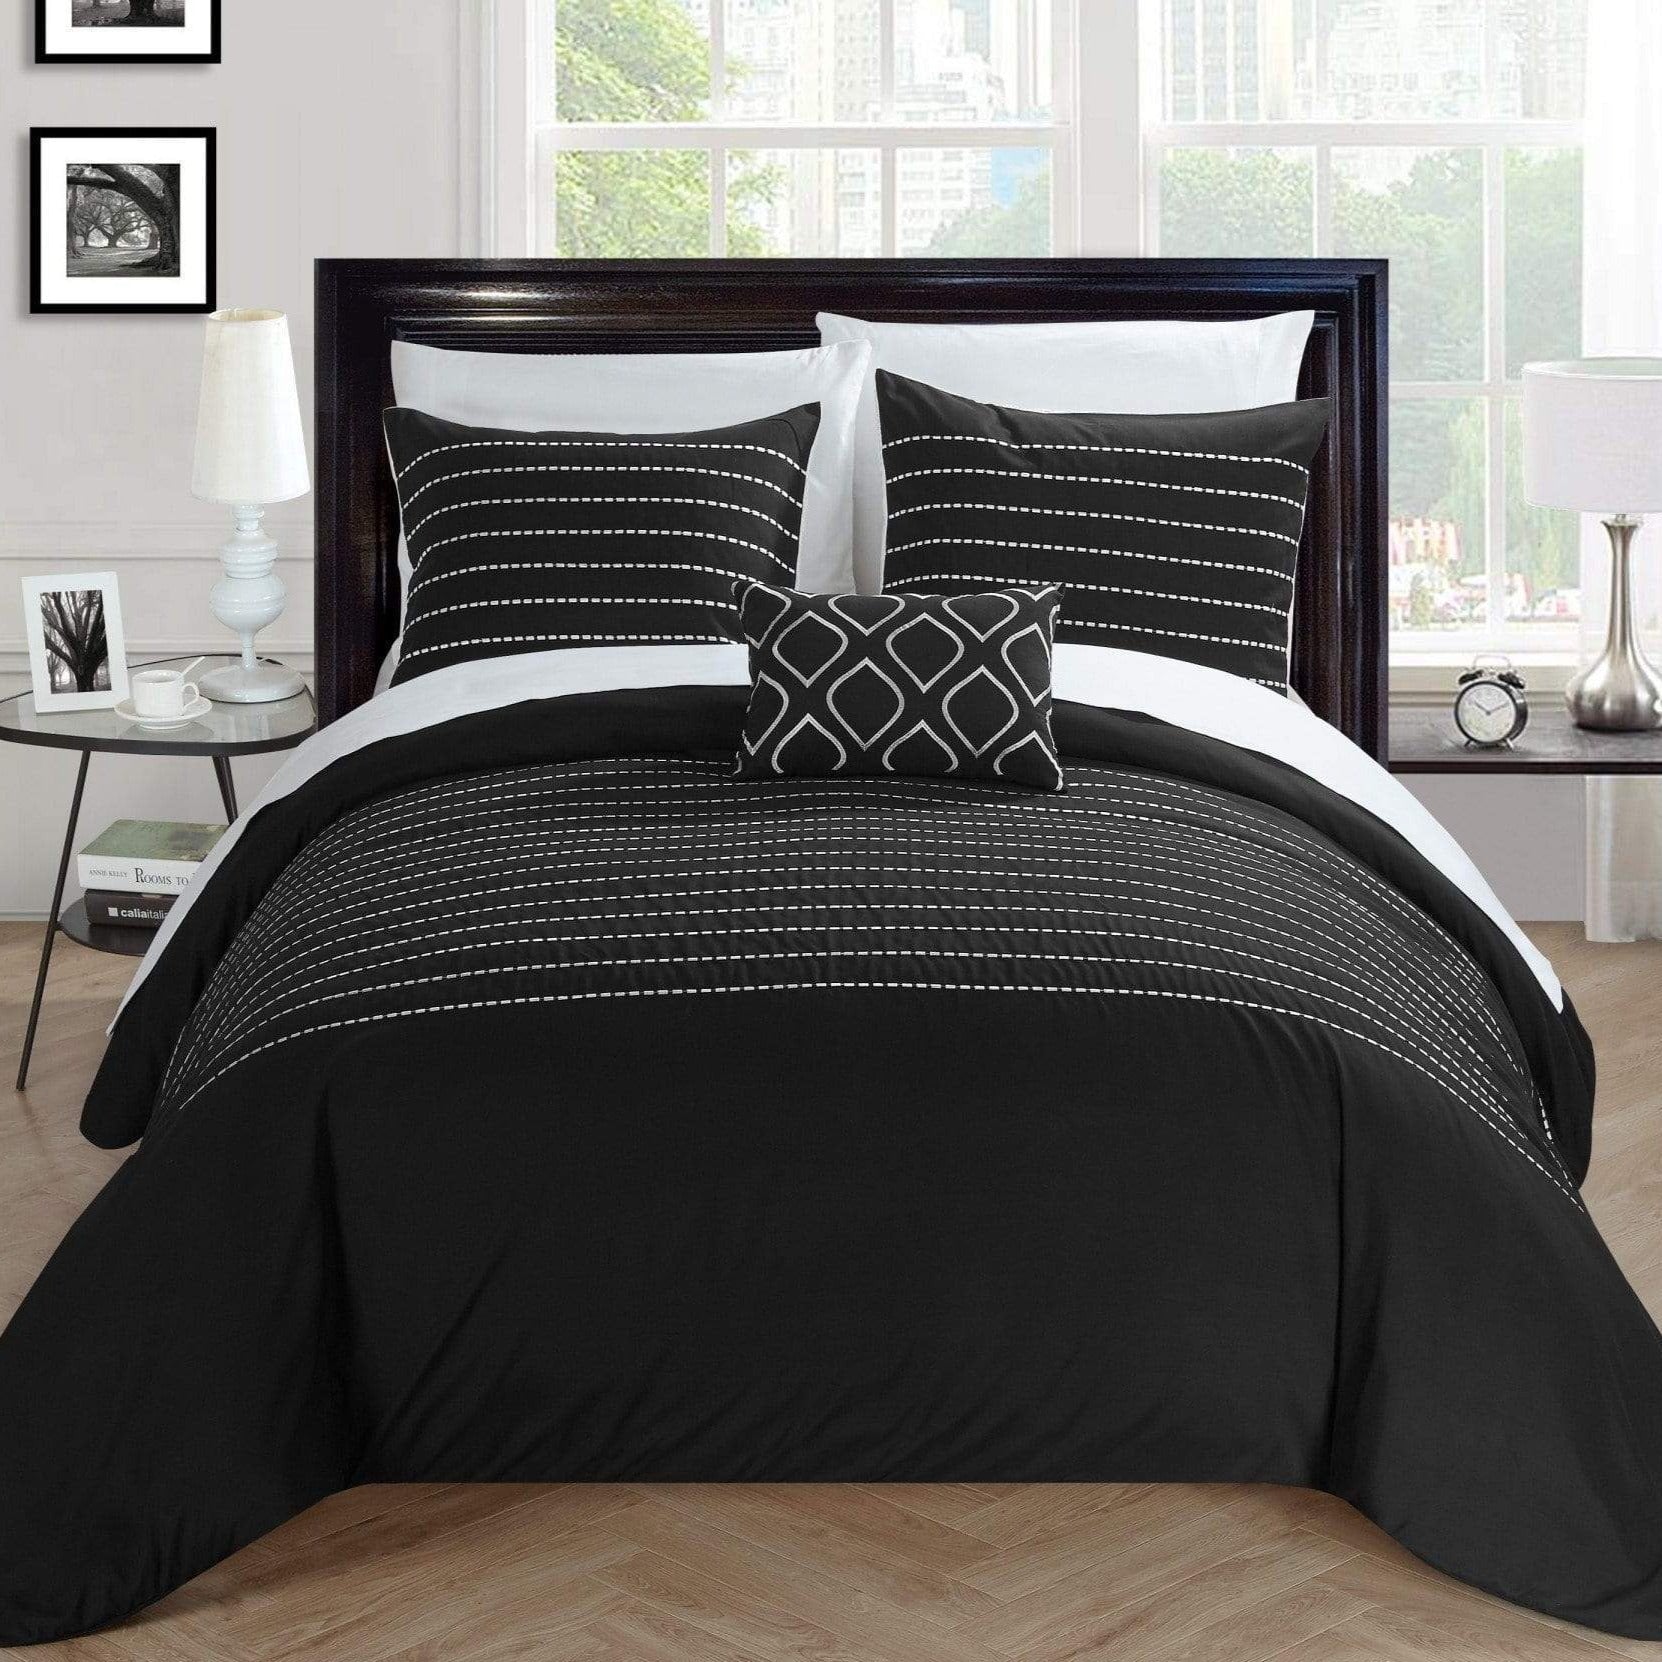 Bea 8 Piece Embroidered Duvet Cover Set